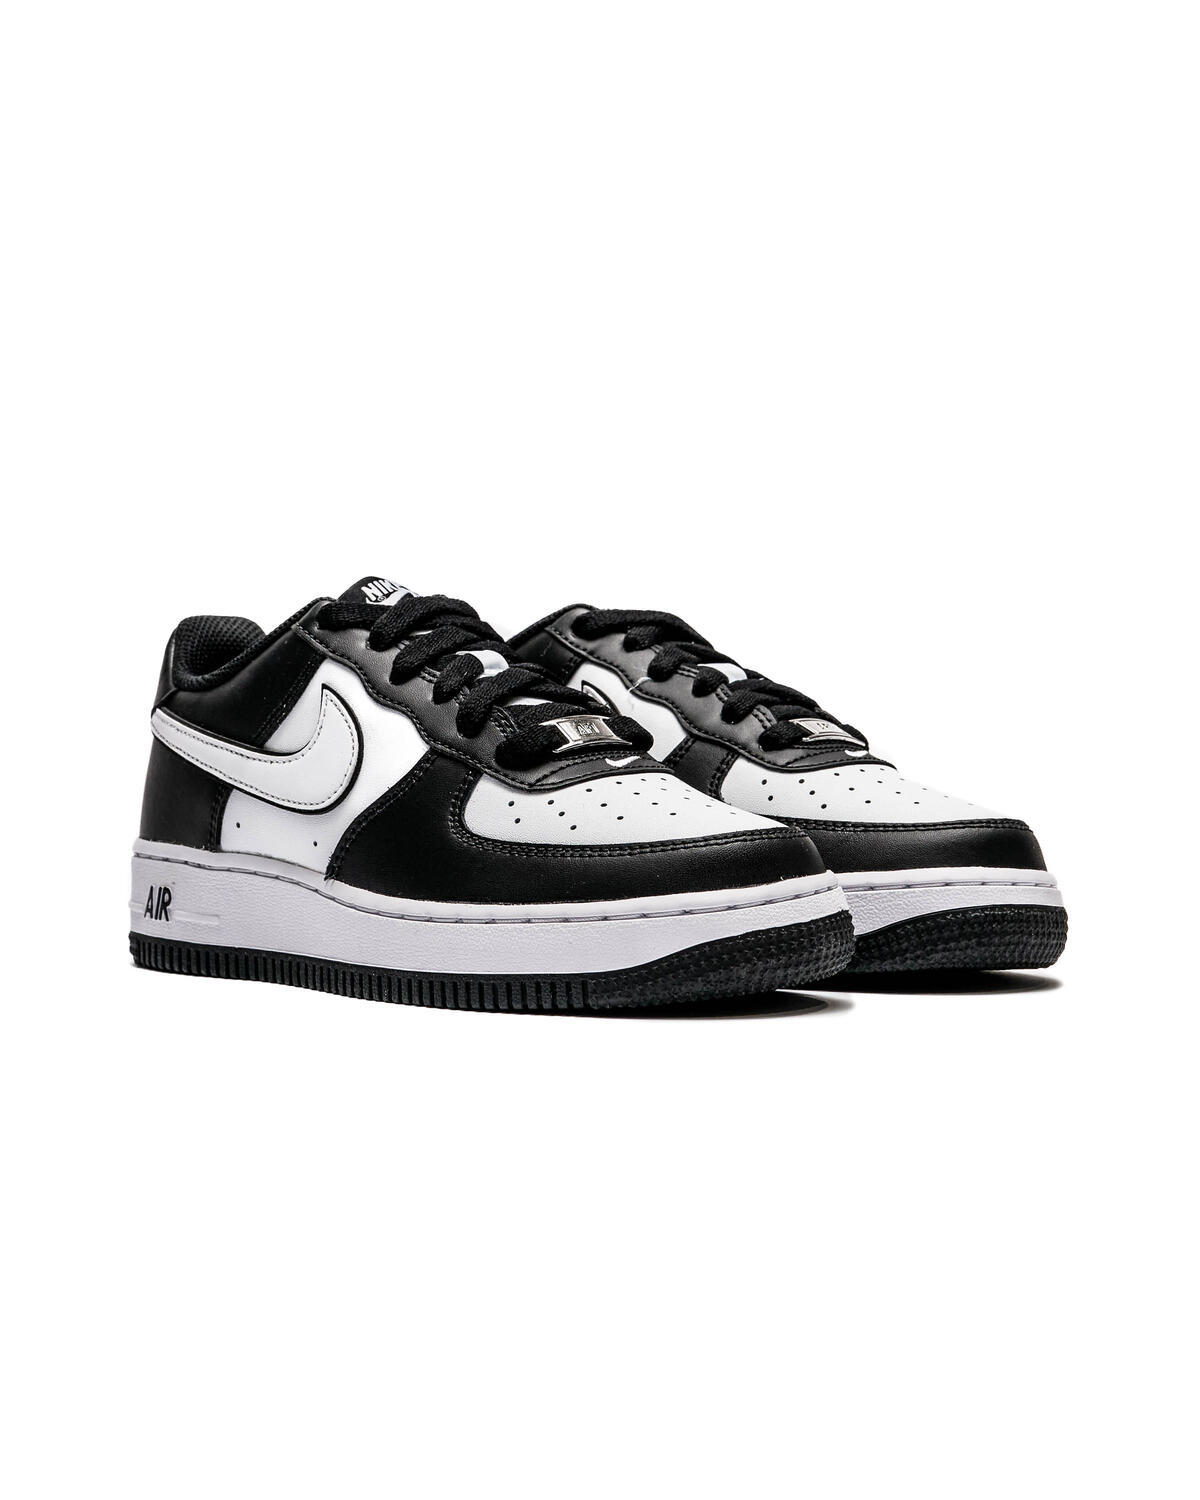 Nike Air Force 1 Low '07 LV8 'Just Do It' - White & Black Size 9.5